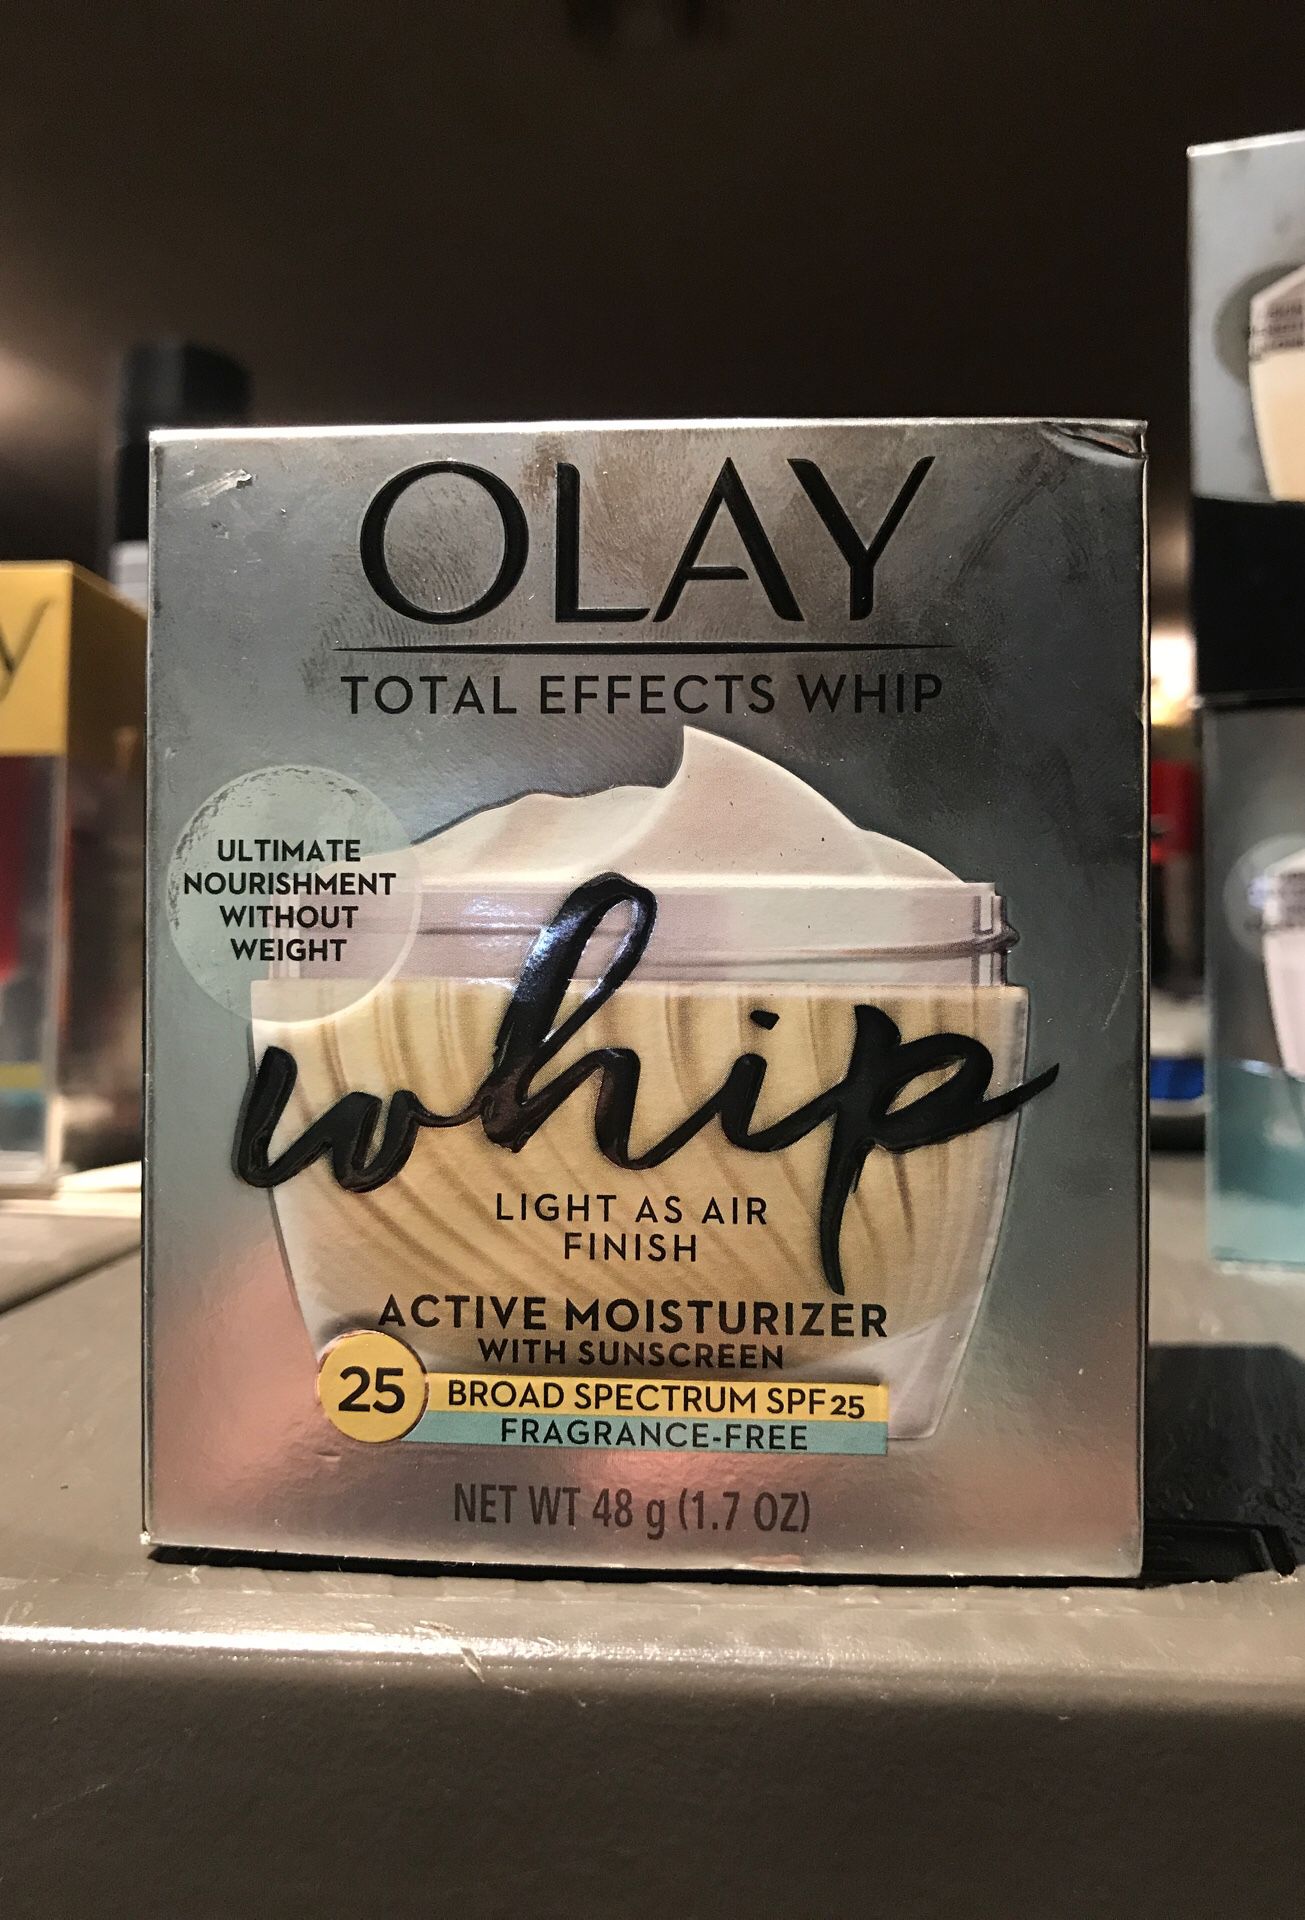 Olay total effects whip